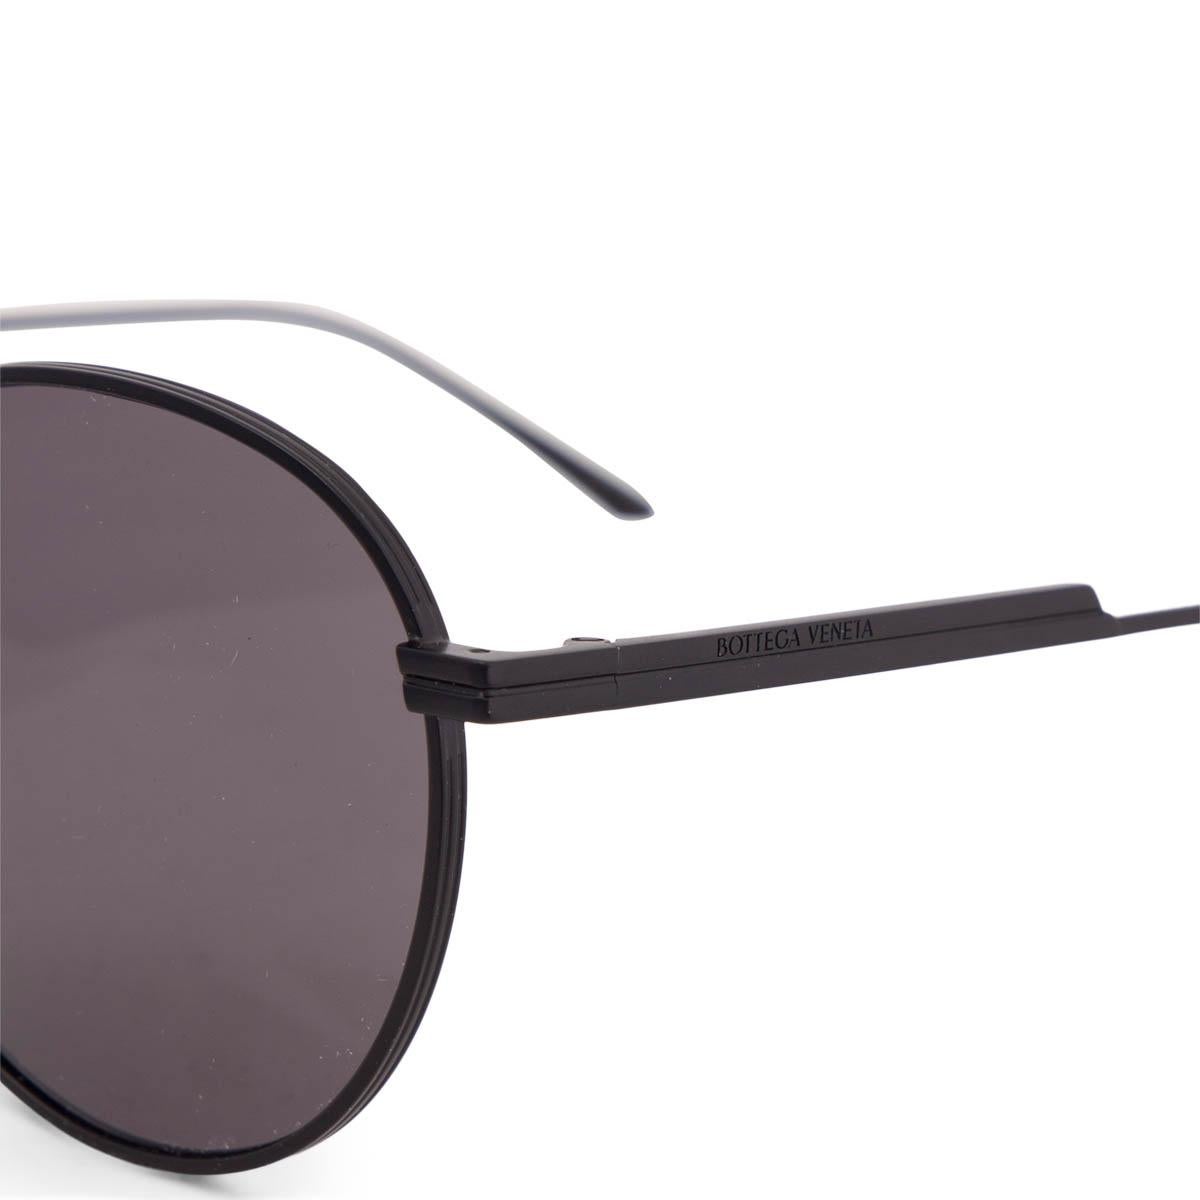 100% authentic Bottega Veneta BV1042SA round shaped sunglasses in black metal with soft gradient grey lenses. The frame is made of satin-finished metal with a black finished. Have been worn and are in excellent condition. Without a case.